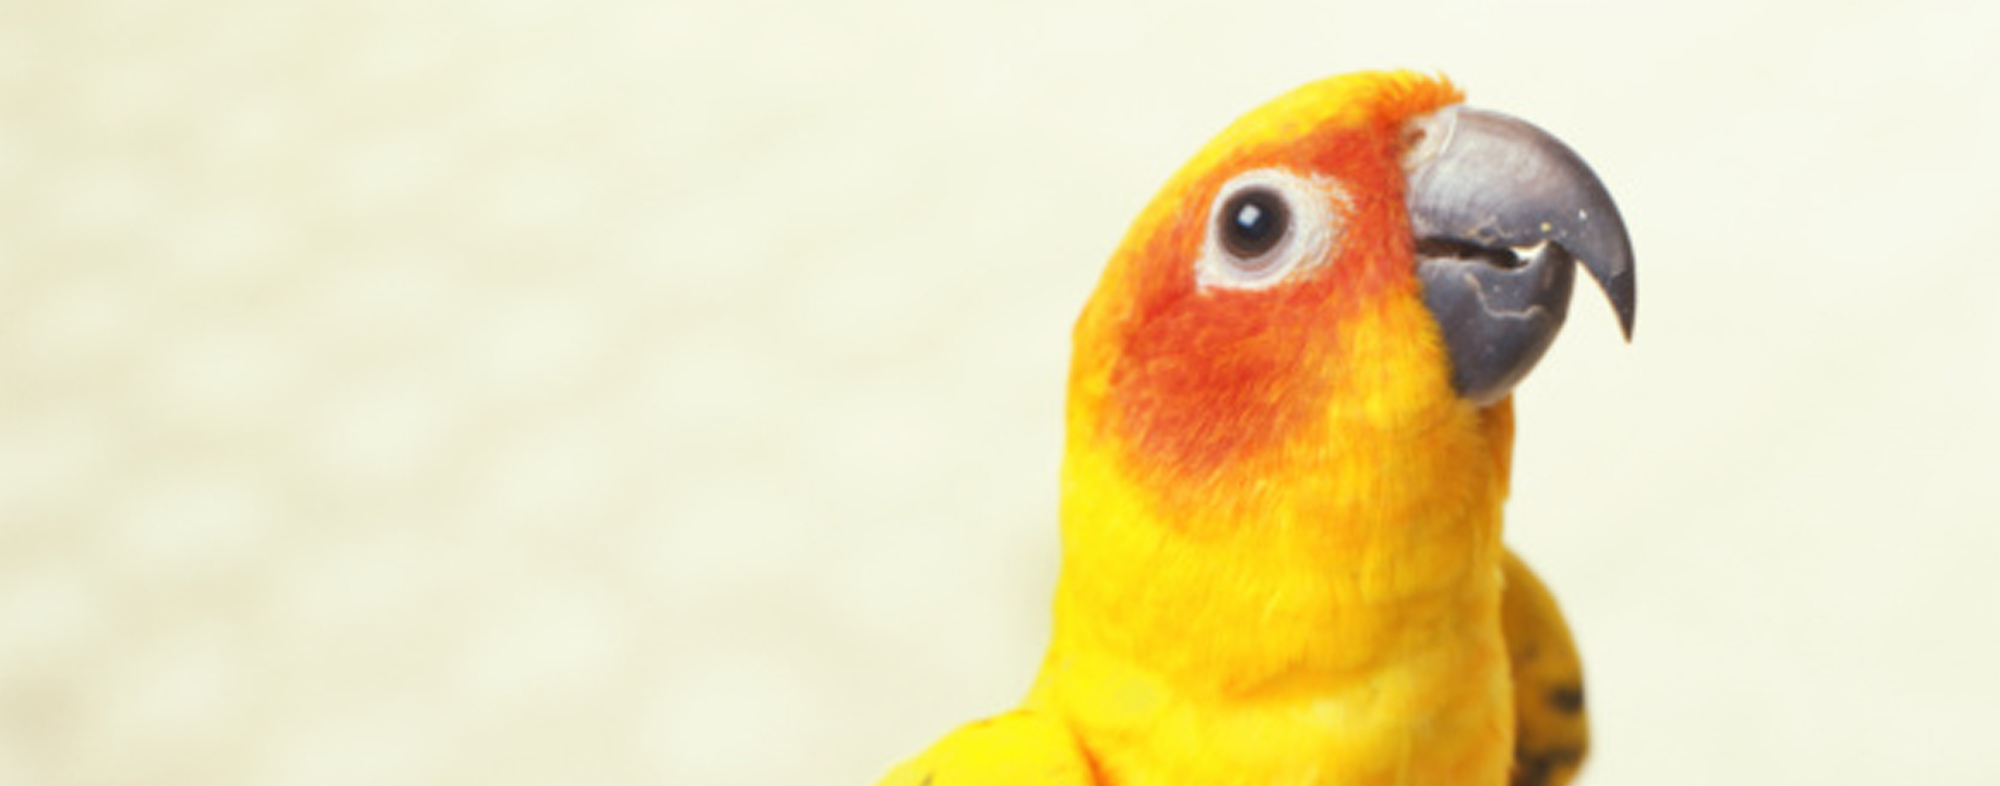 Candycorn feathered pet parrot with a good diet and hygiene regiment